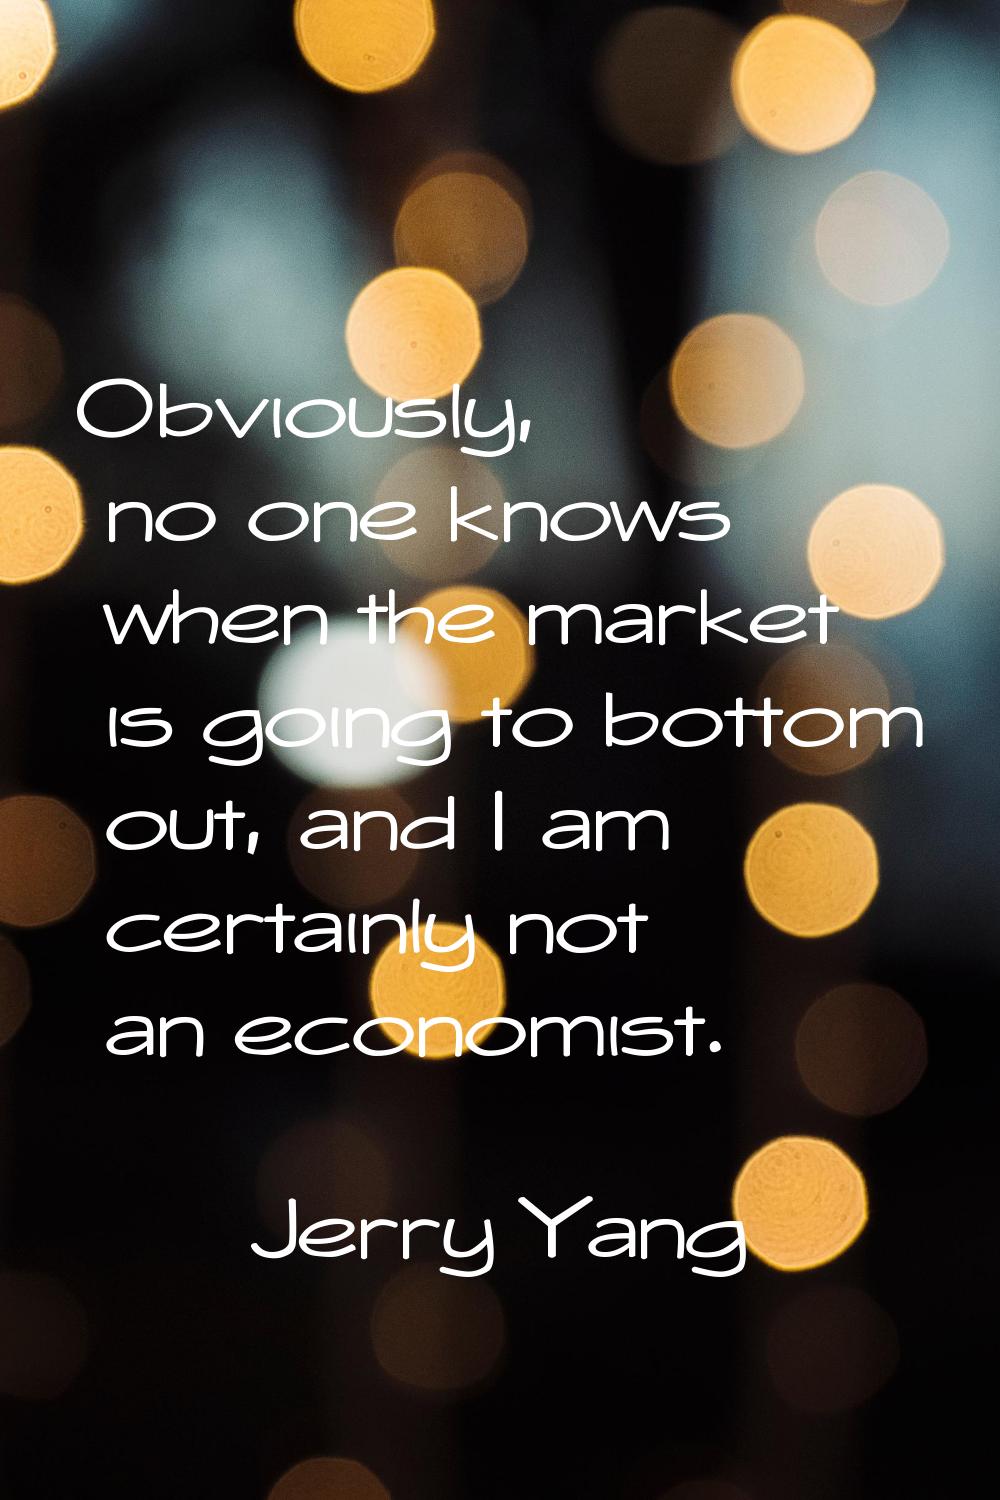 Obviously, no one knows when the market is going to bottom out, and I am certainly not an economist